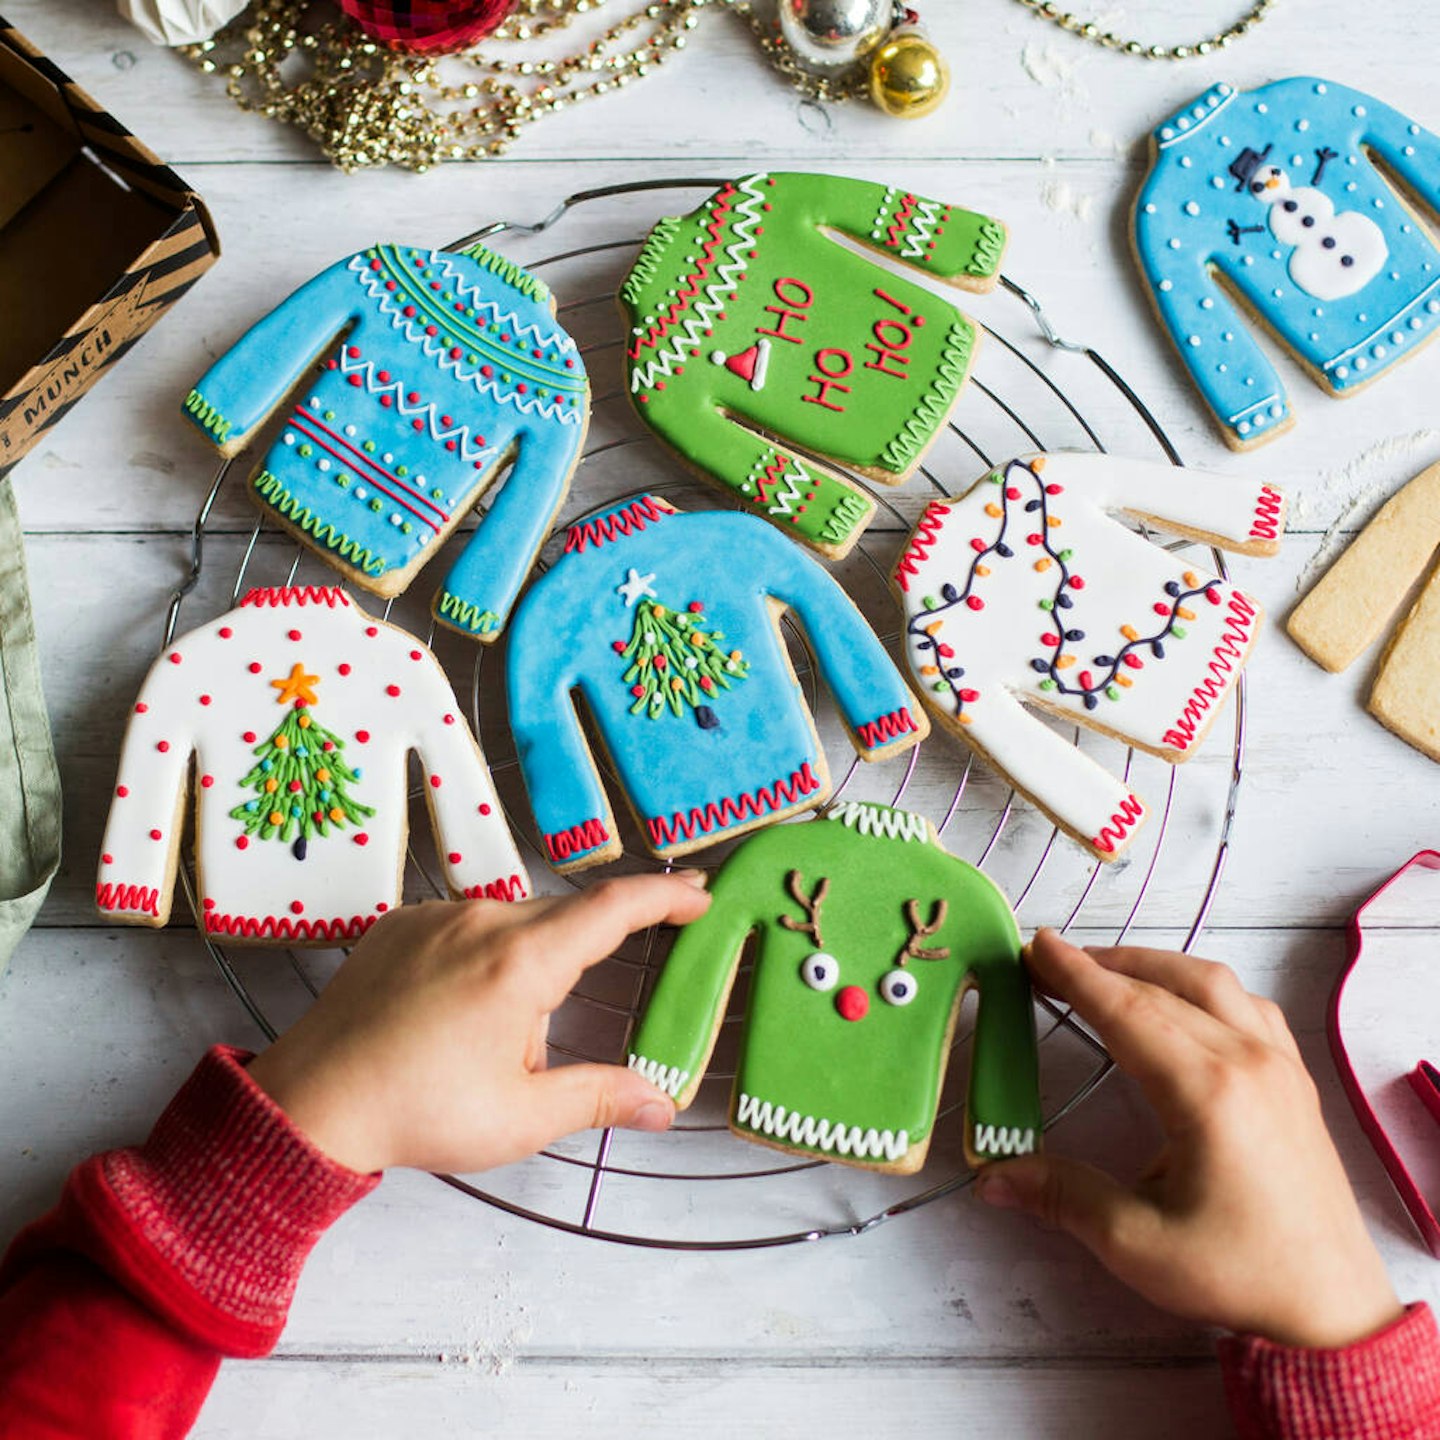 The best cookie decorating kits: Christmas Jumper Biscuit Baking Kit